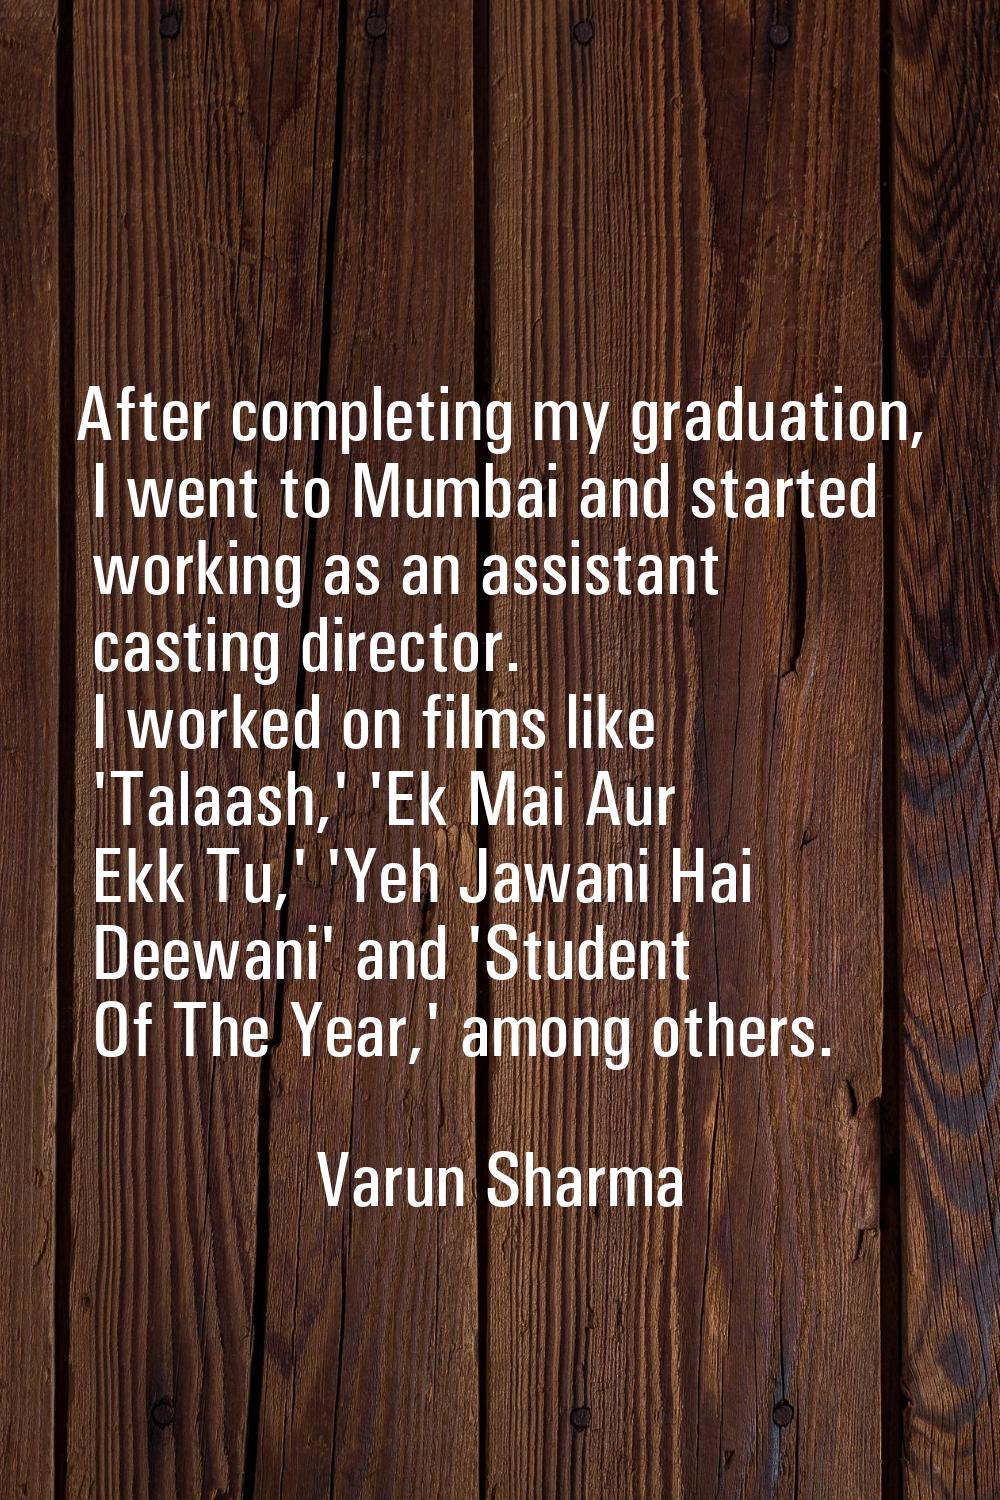 After completing my graduation, I went to Mumbai and started working as an assistant casting direct